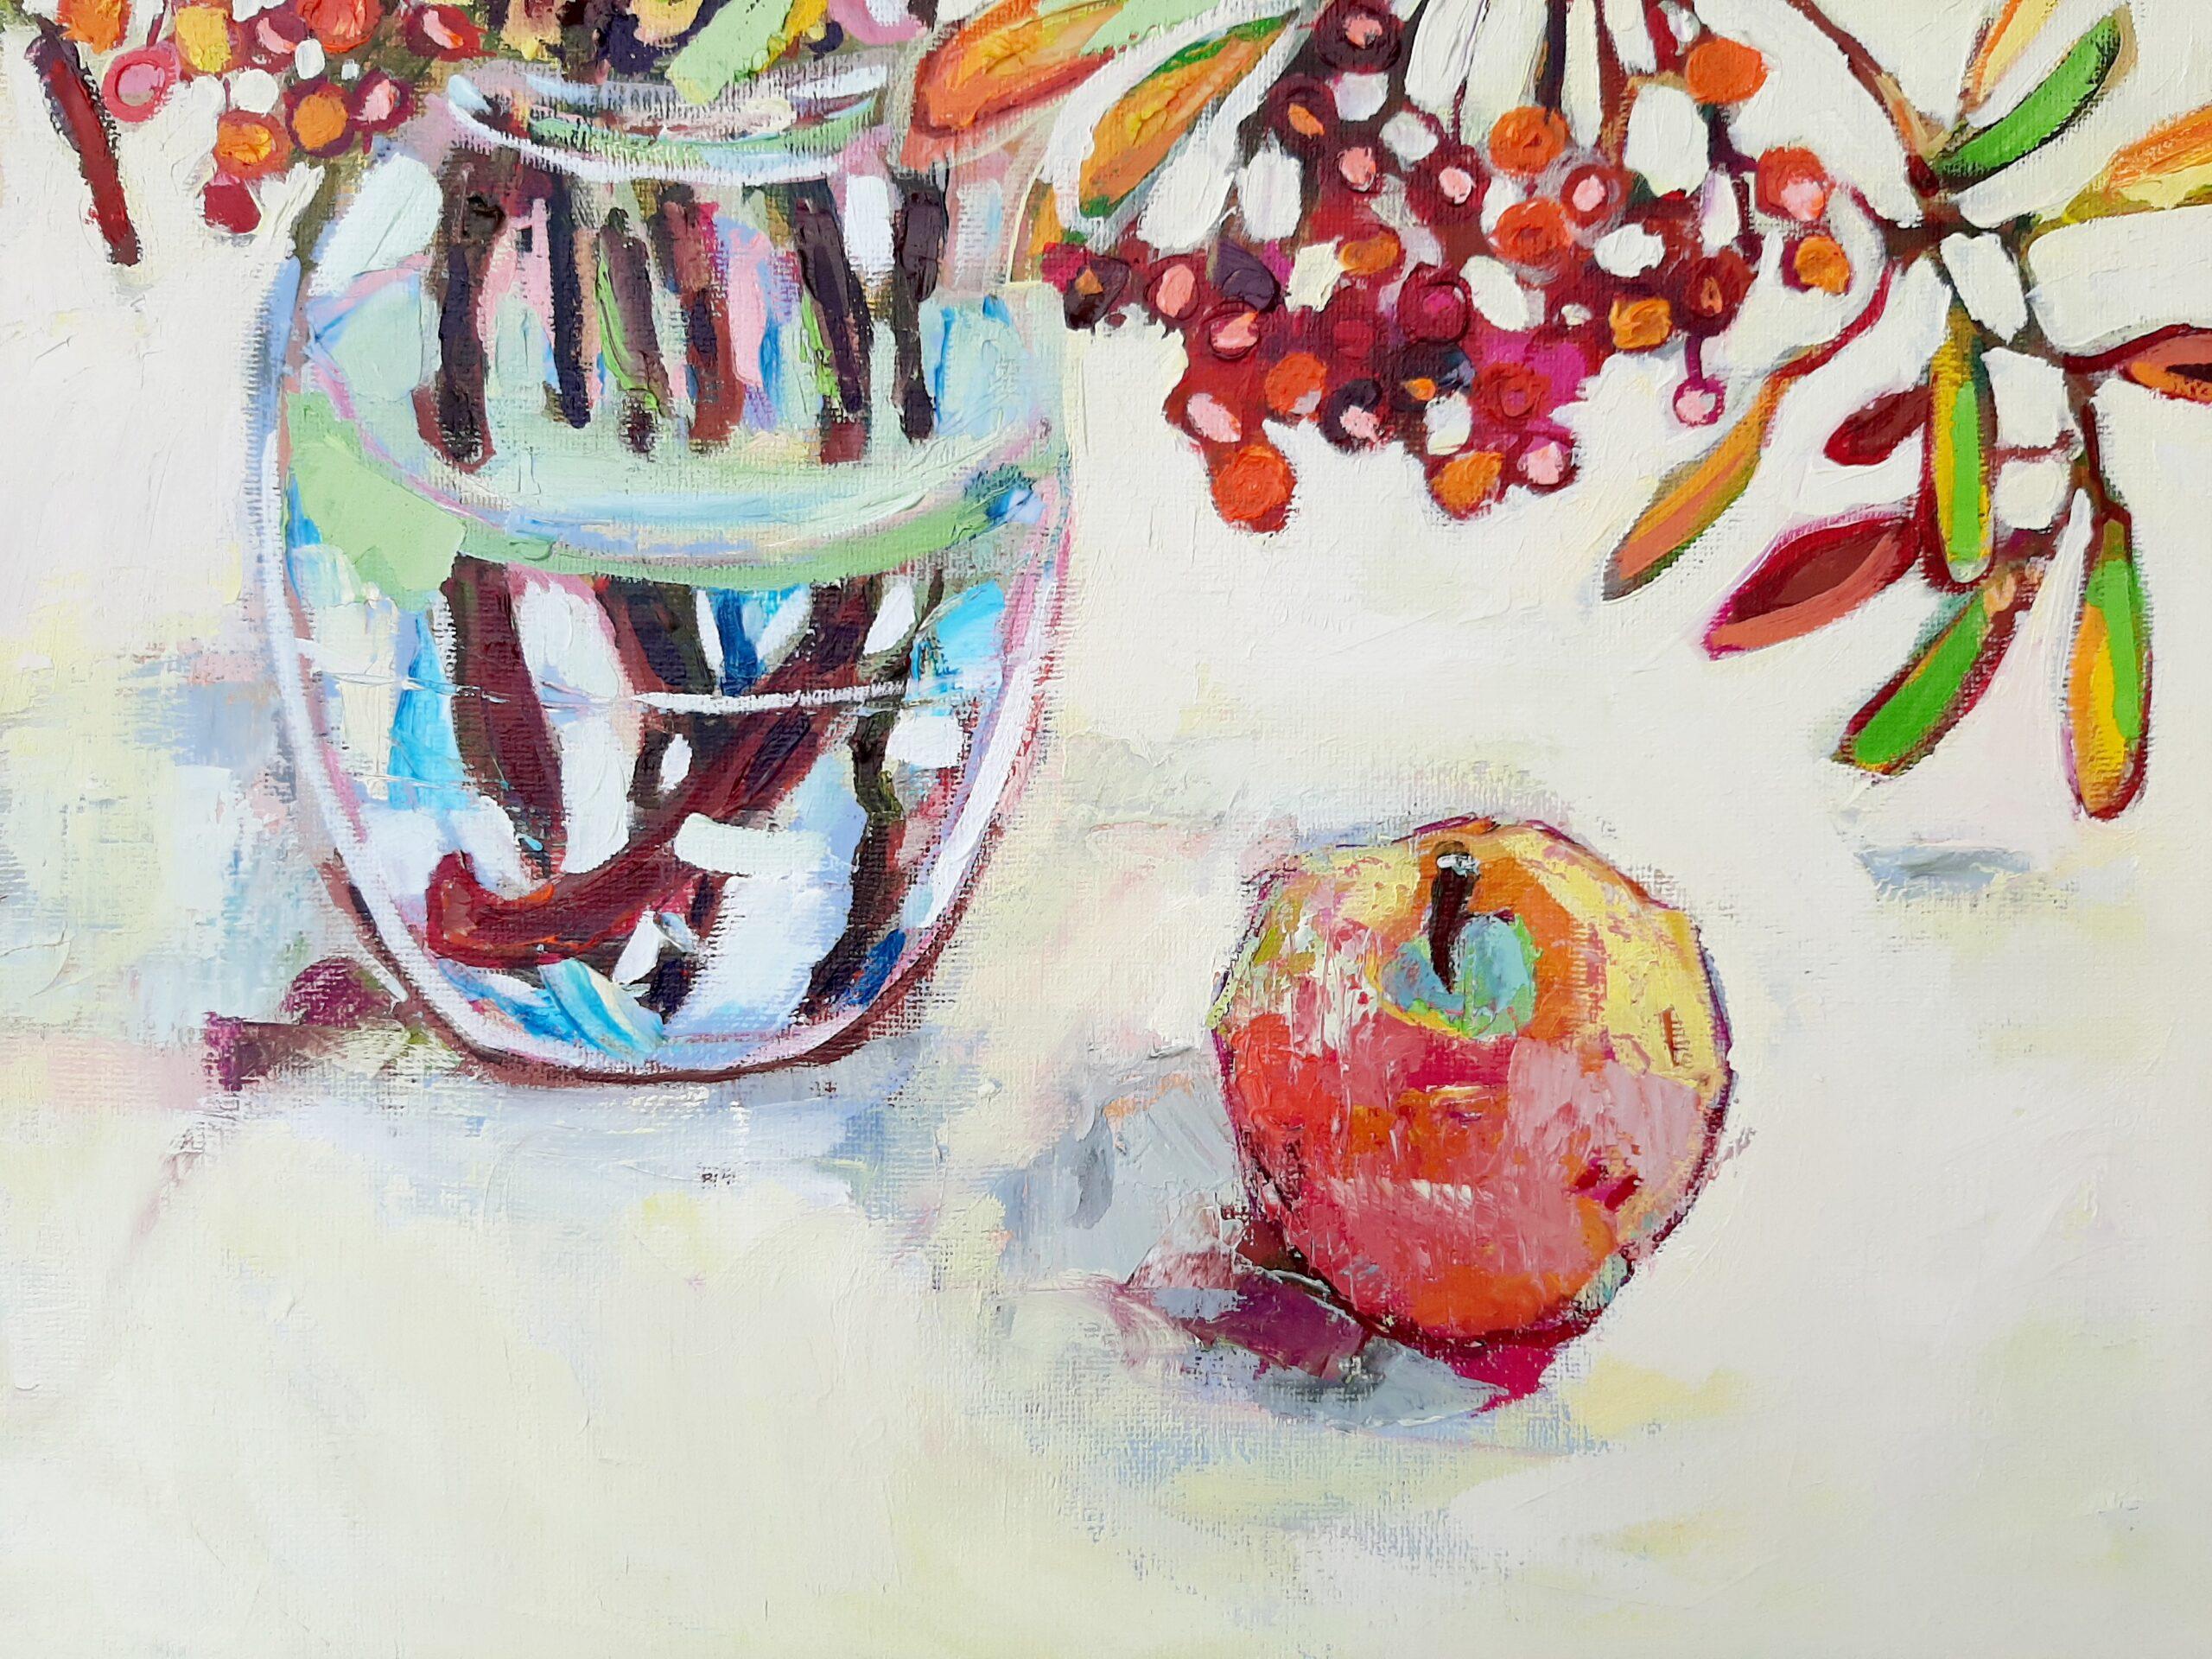 Of Polish descent and now living in London, Ania Pieniazek creates bold, bright art full of everyday joy and pleasure.  Influenced by Gustav Klimt, Paul Gauguin and Zbyslaw Marek Maciejewski amongst others, her work observes simple scenes of fruit,